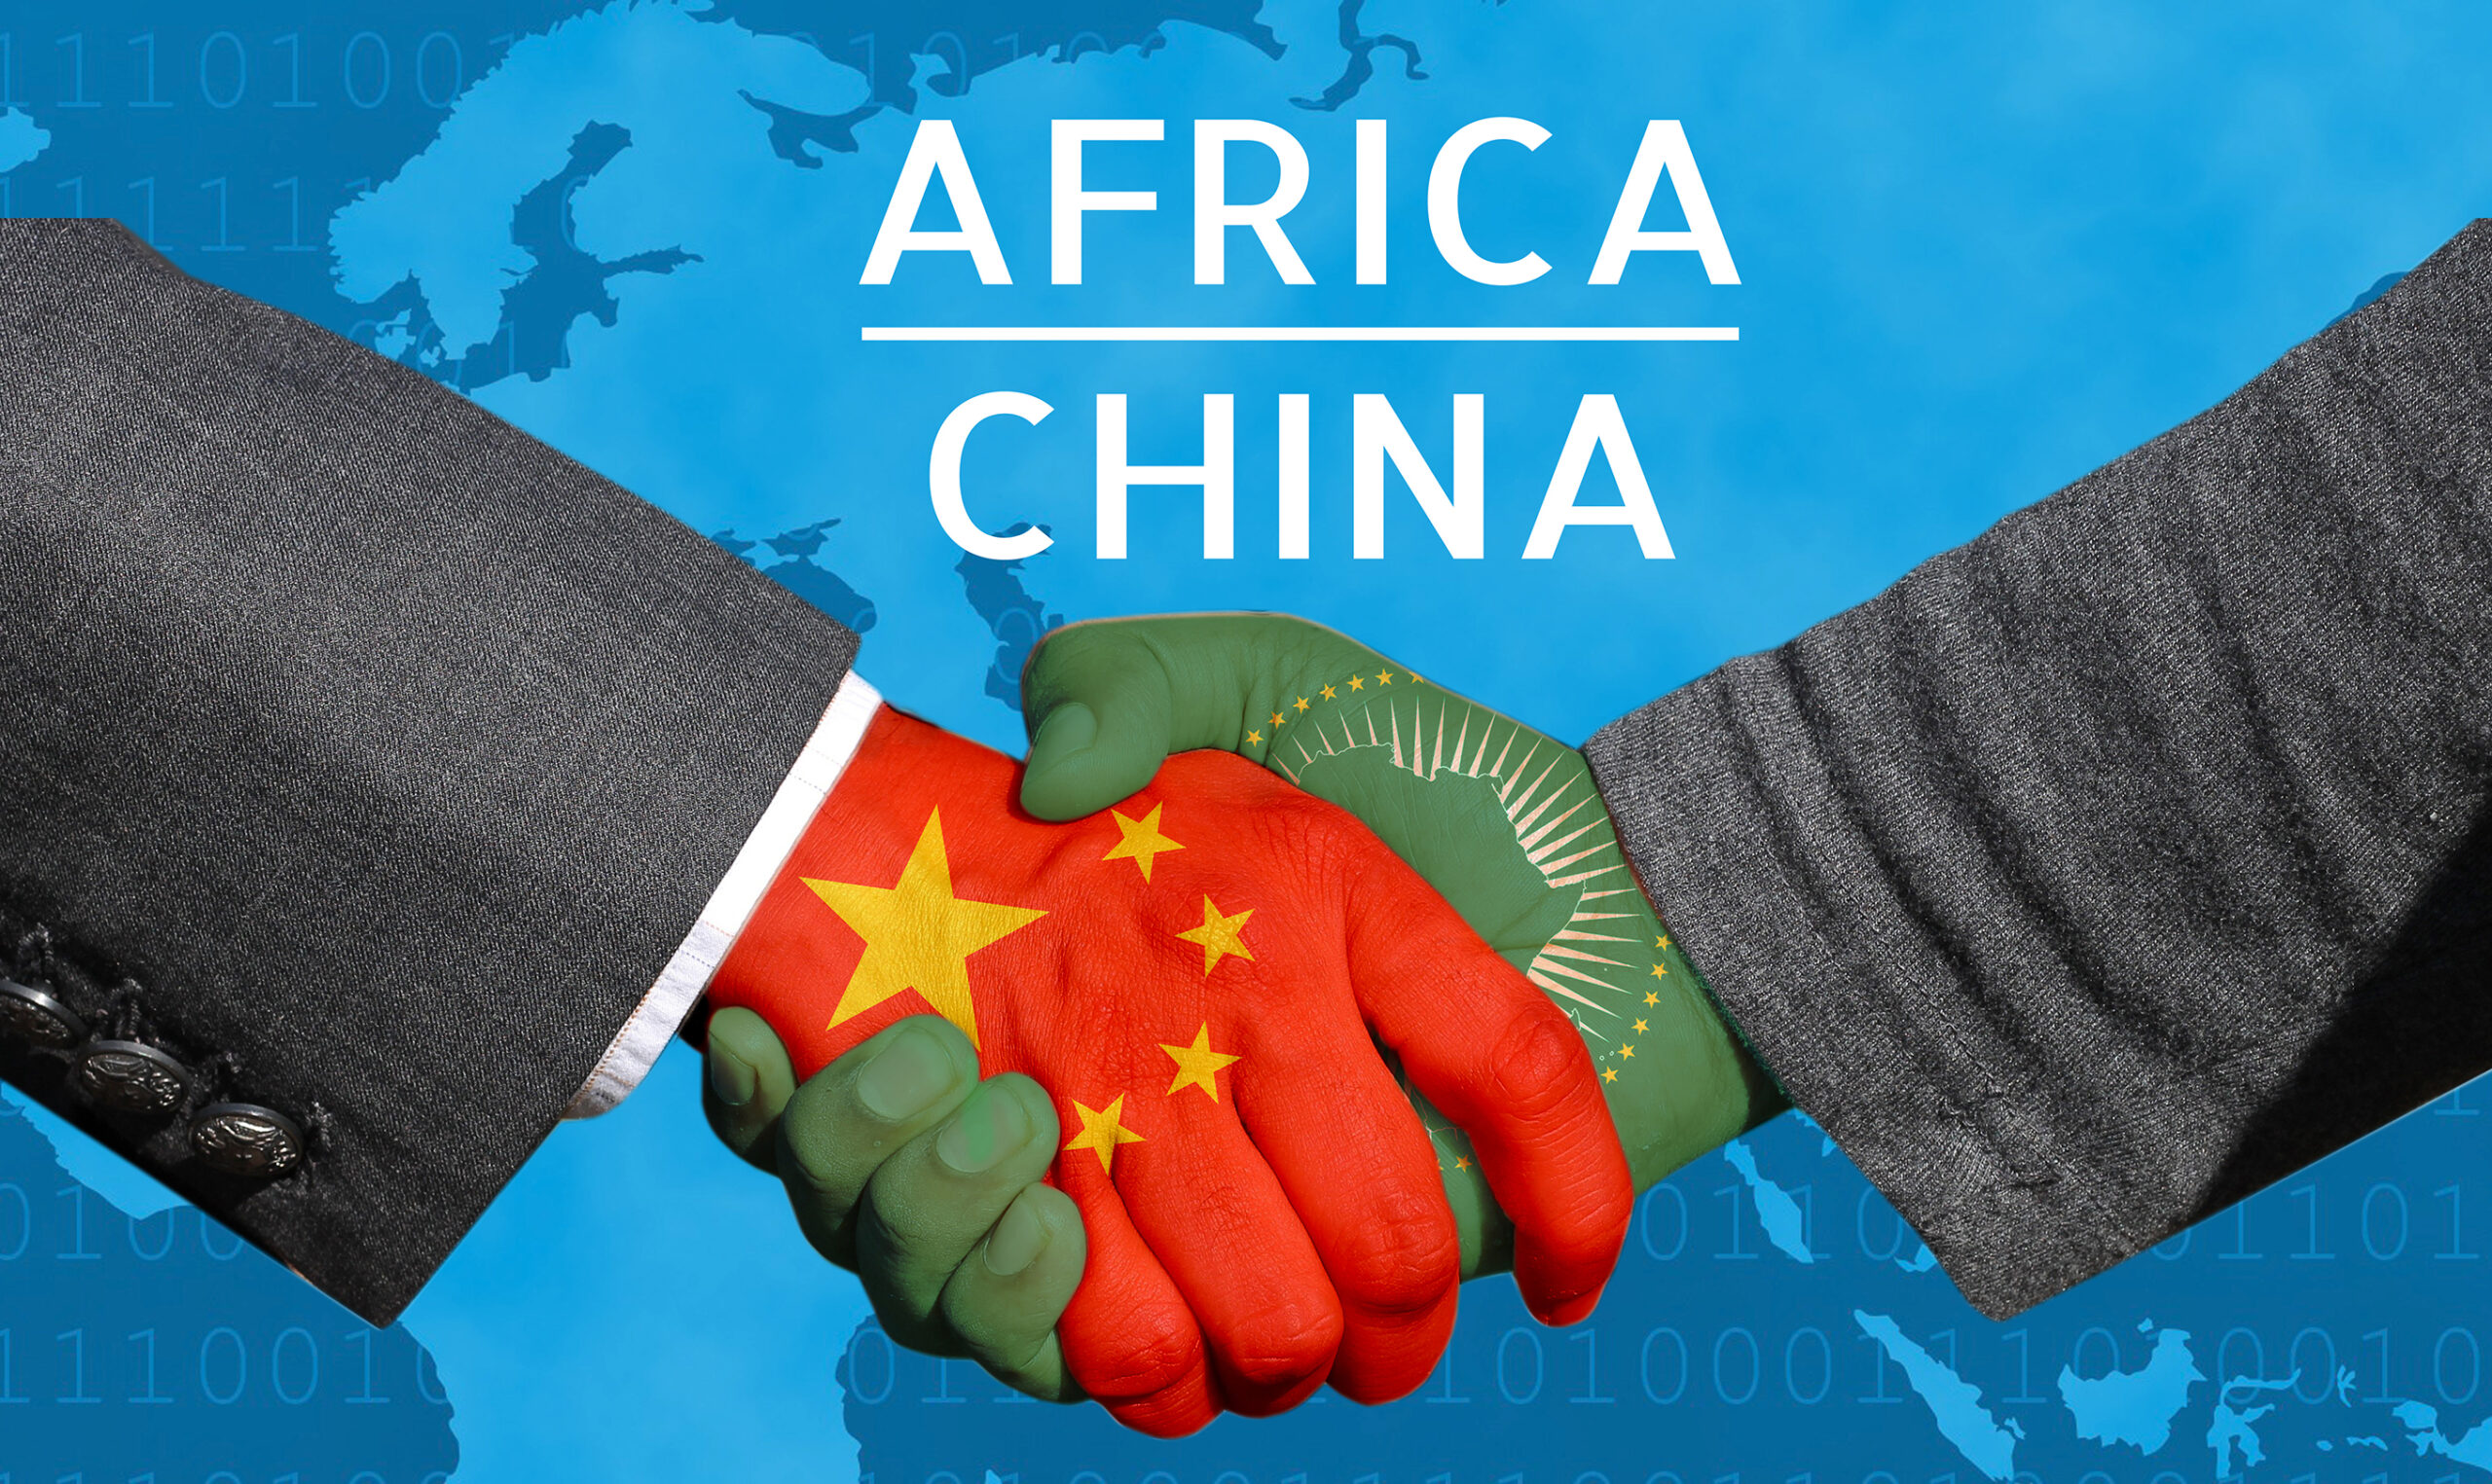 china-rejects-polisario-s-participation-in-africa-summit-medafrica-times